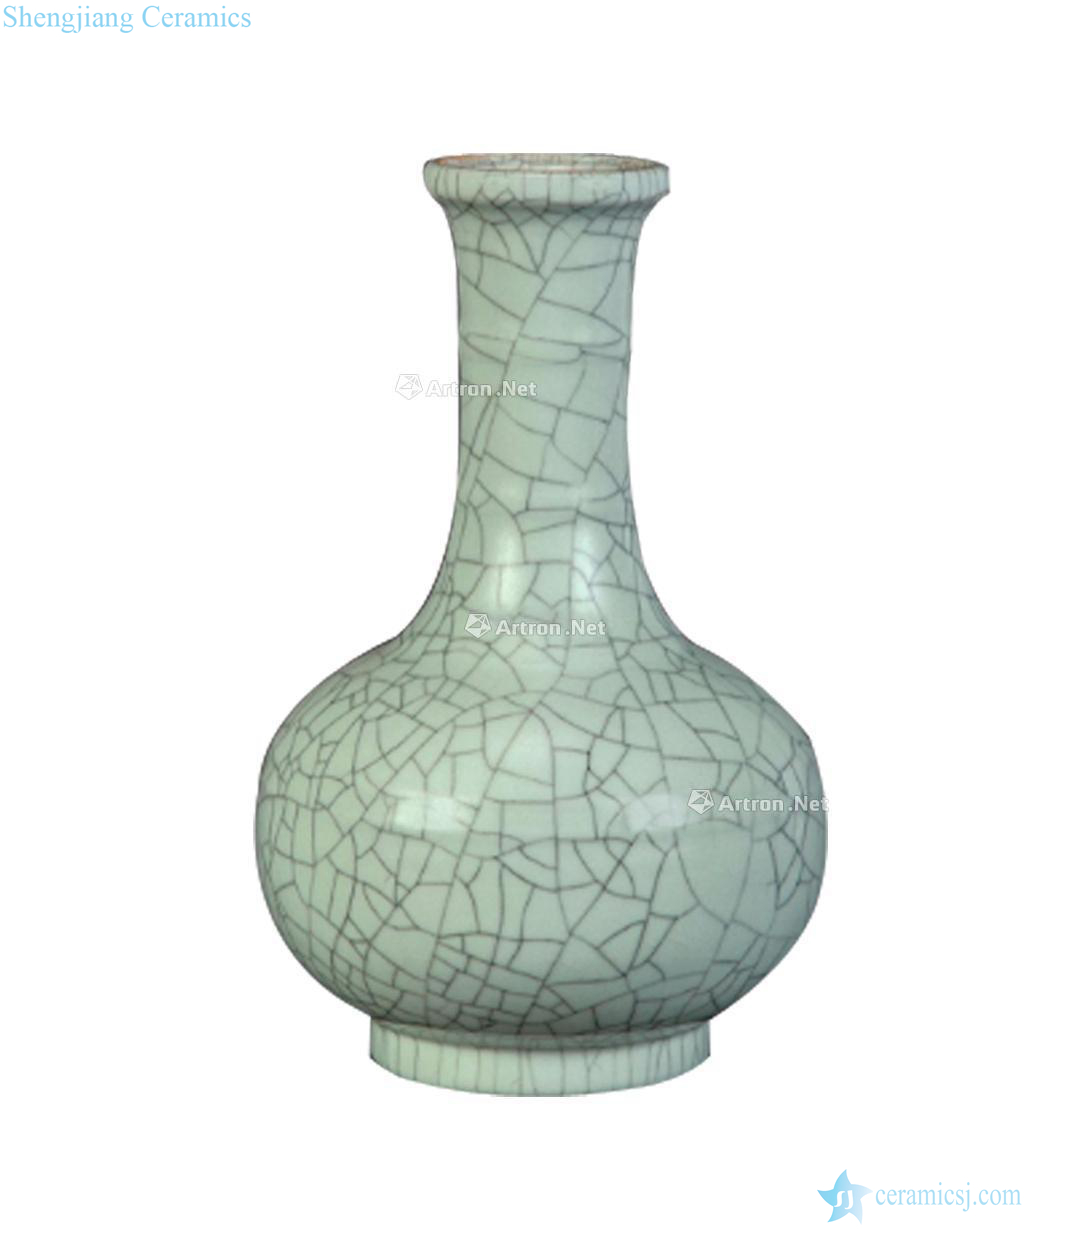 The southern song dynasty Kiln bowstring grain bamboo bottle